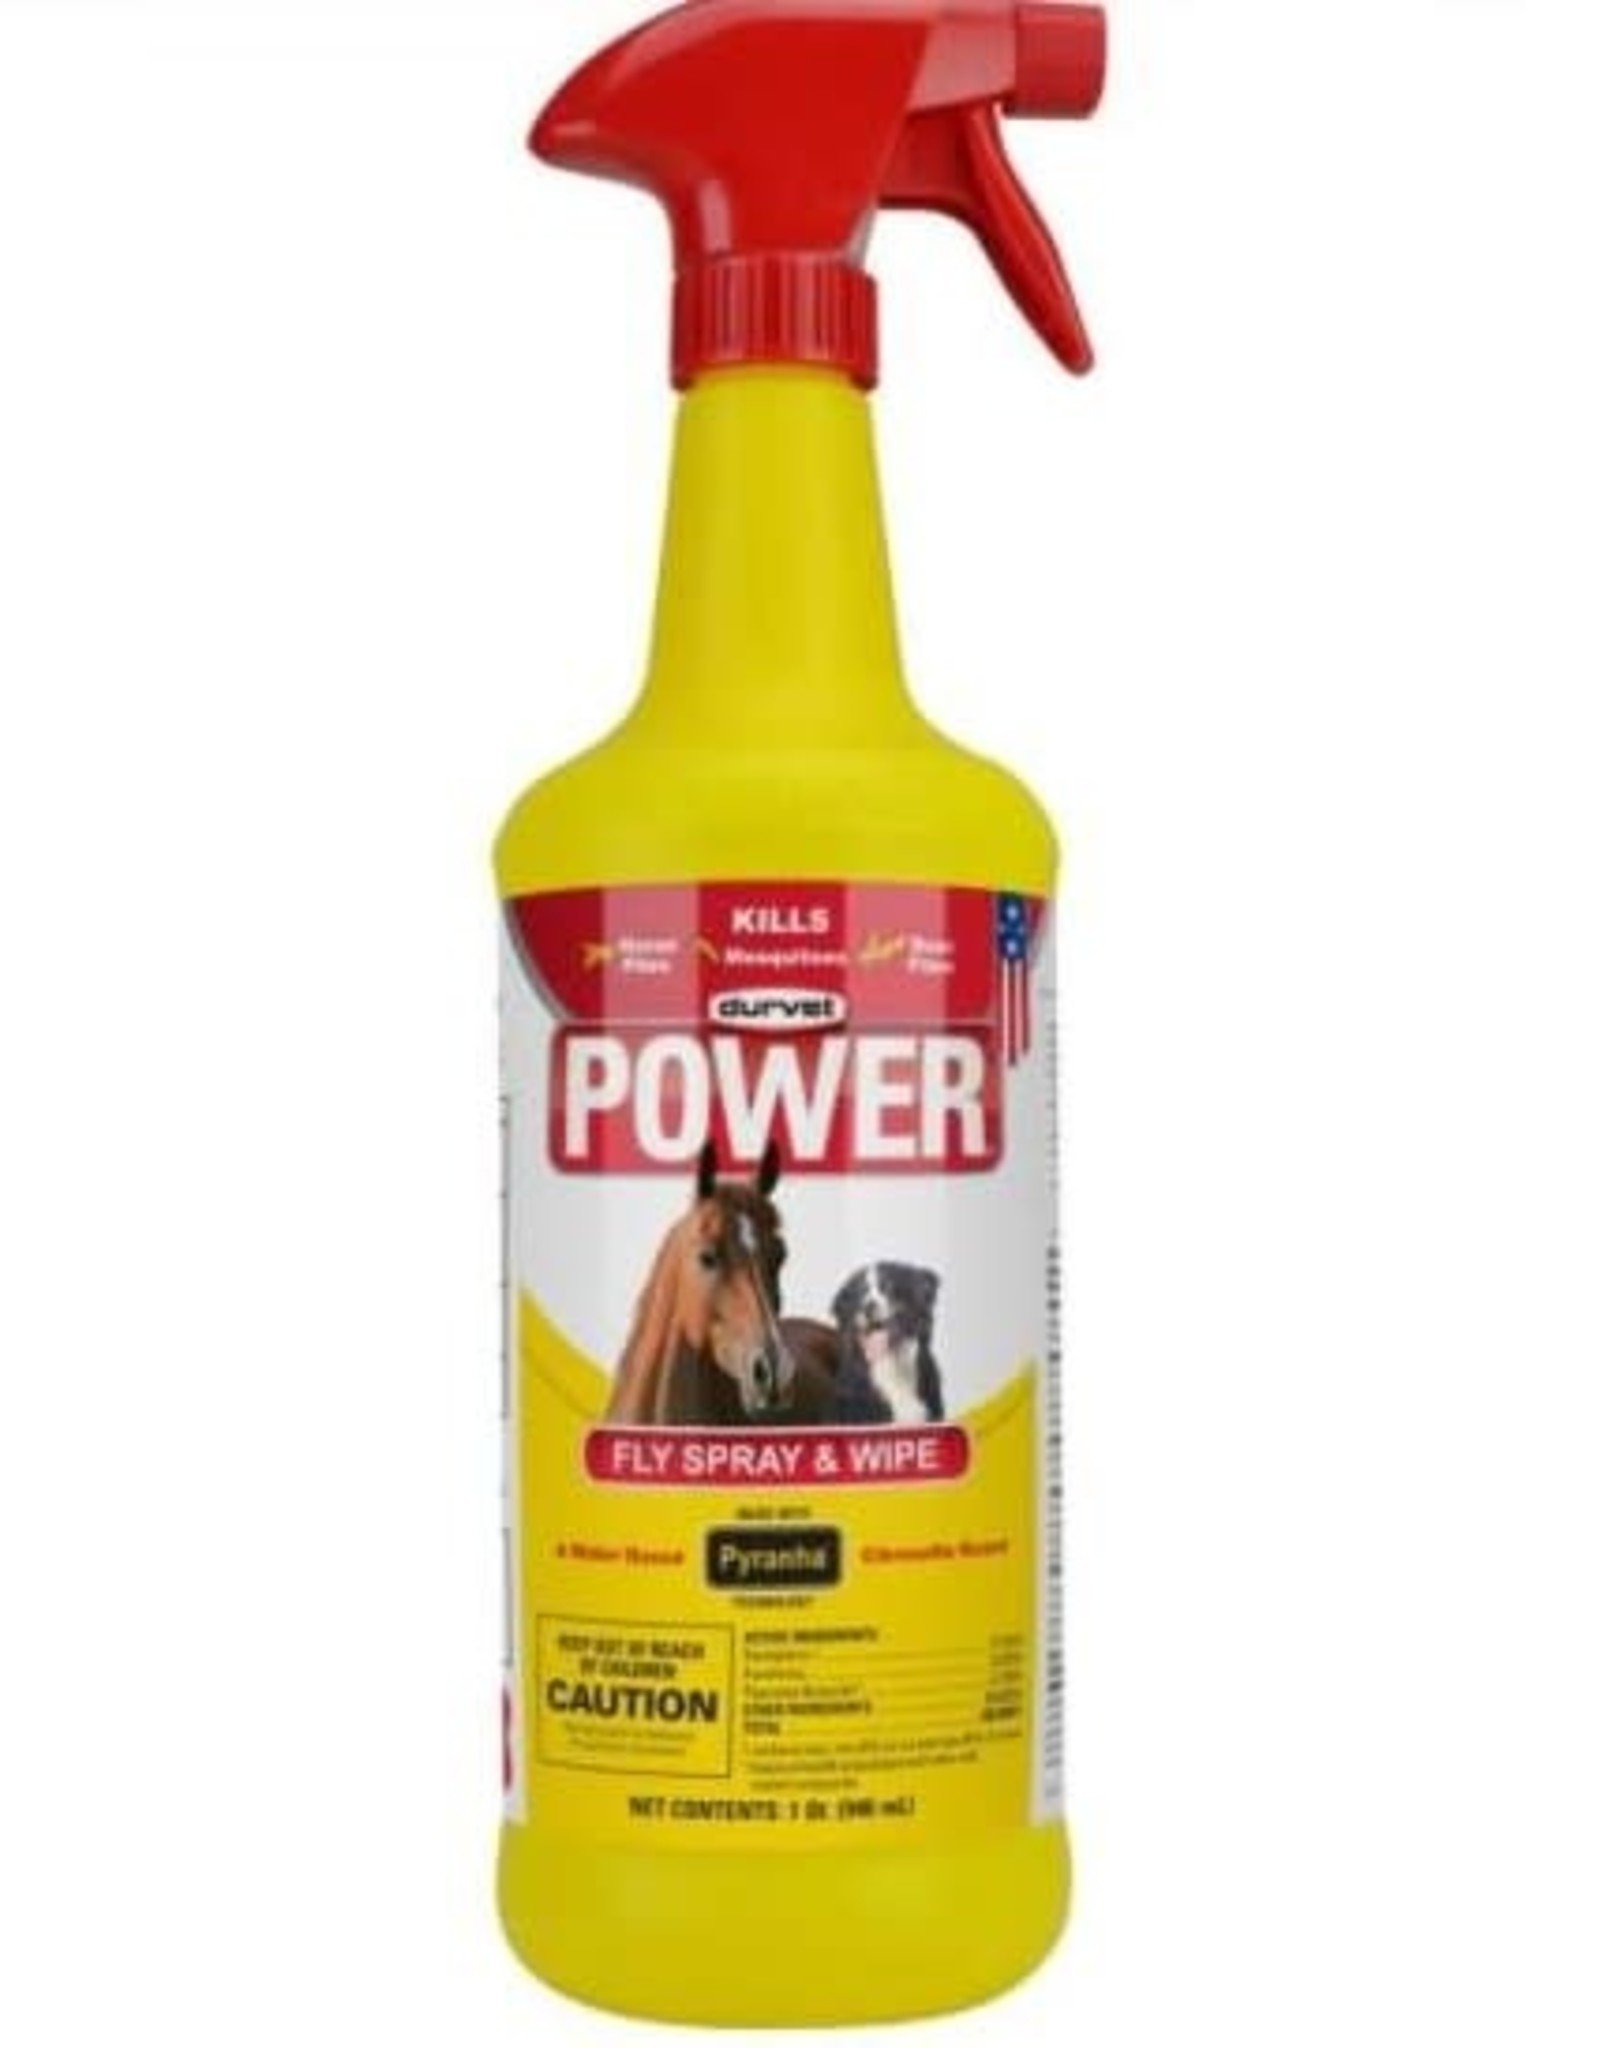 Power fly spray and wipe